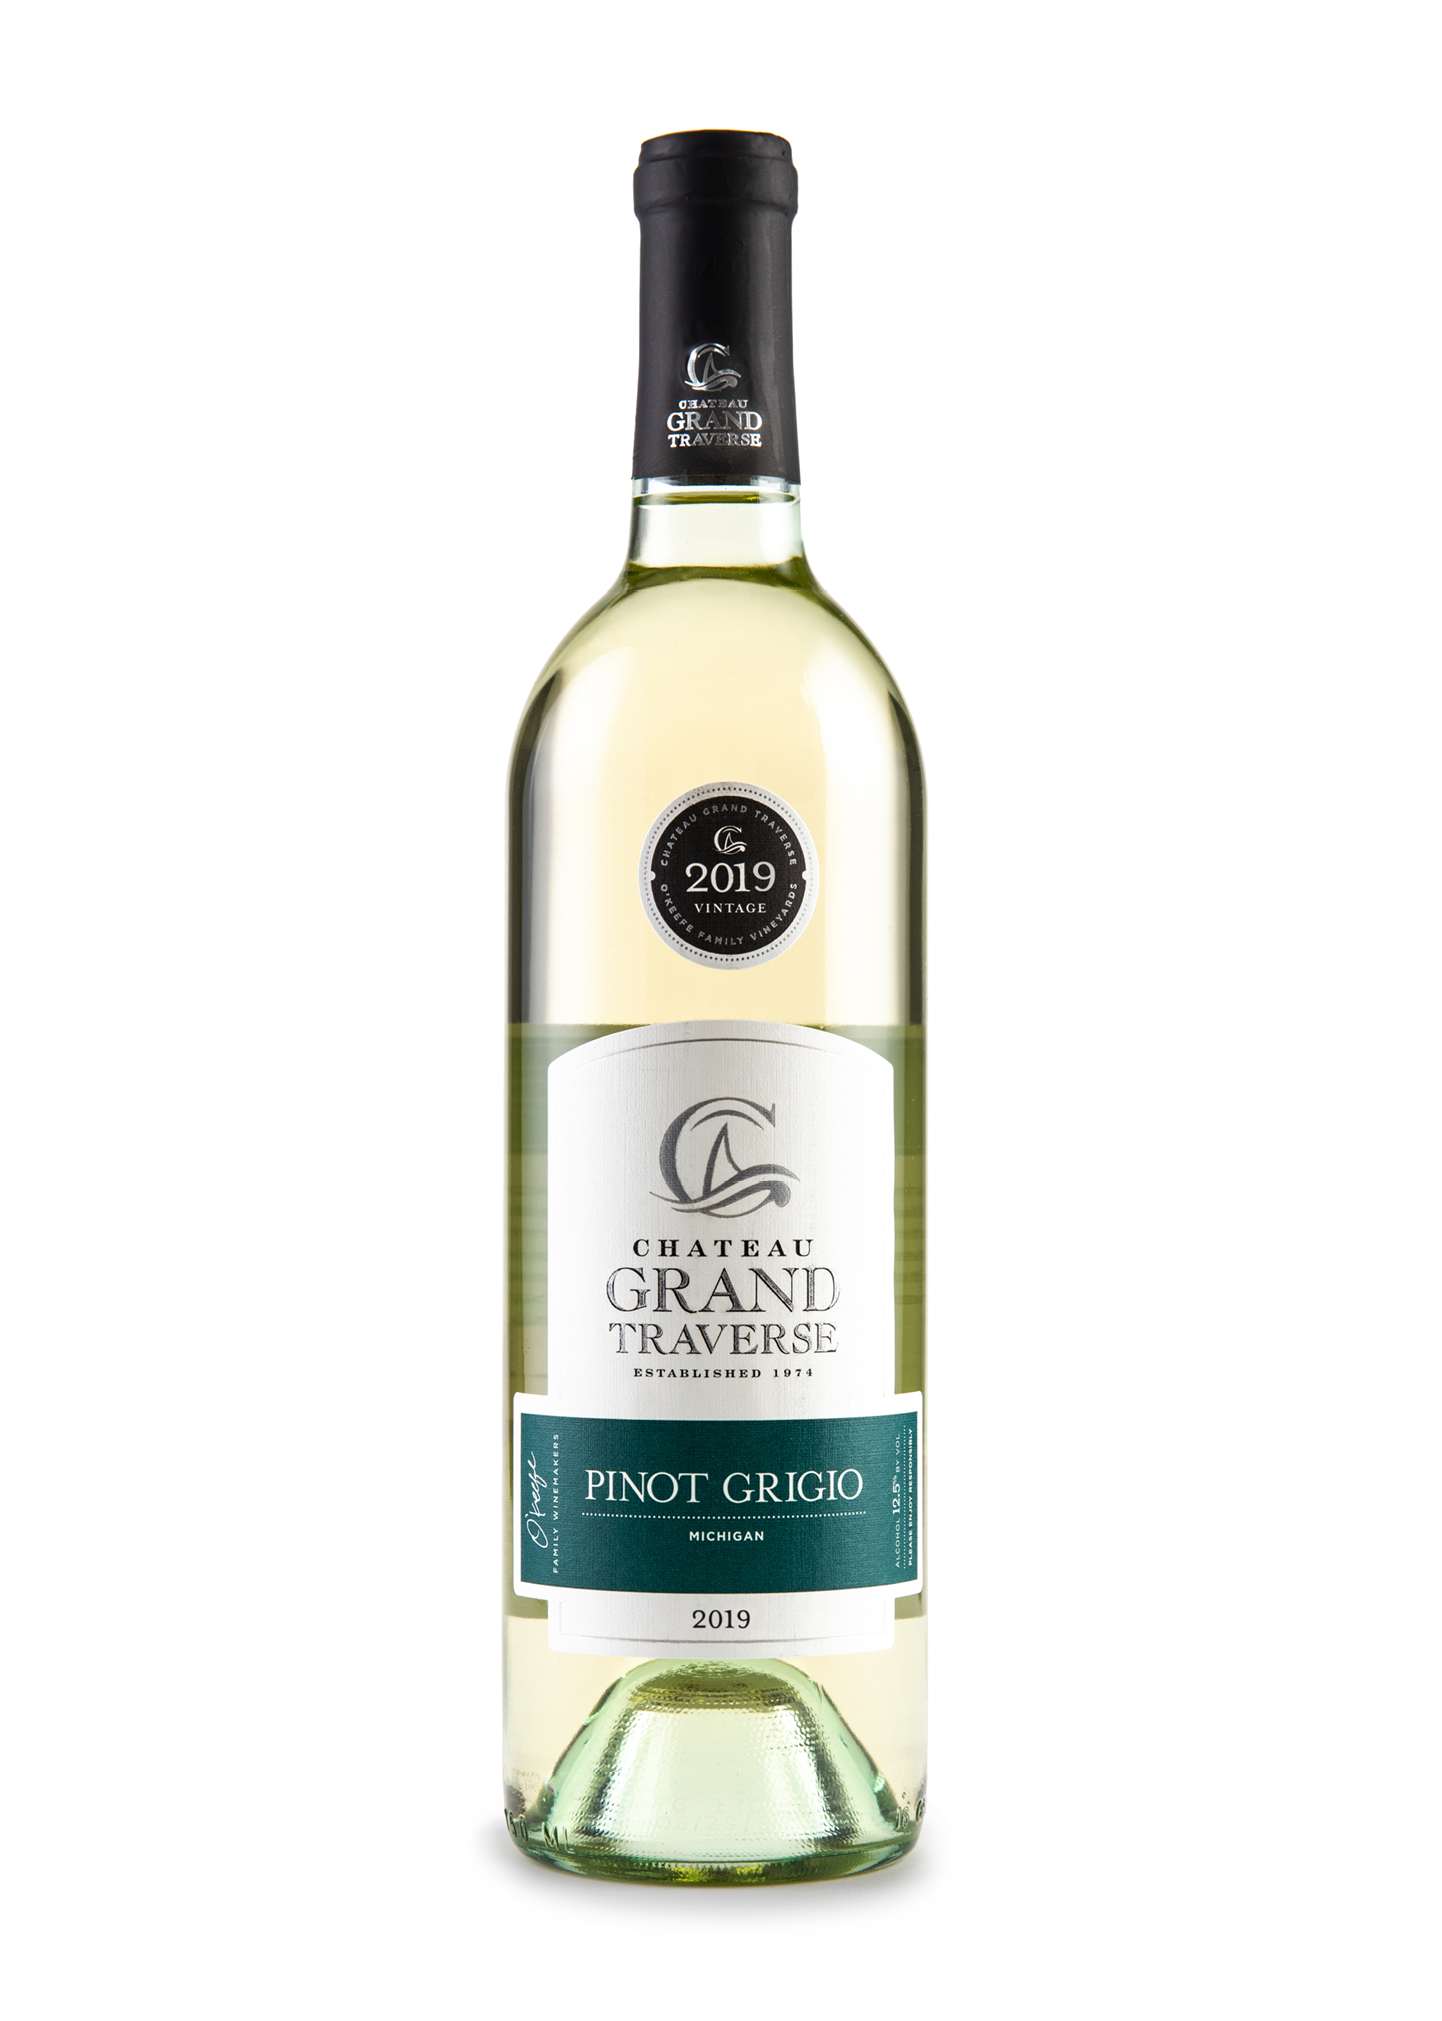 a bottle of 2019 Pinot Grigio from Chateau Grand Traverse